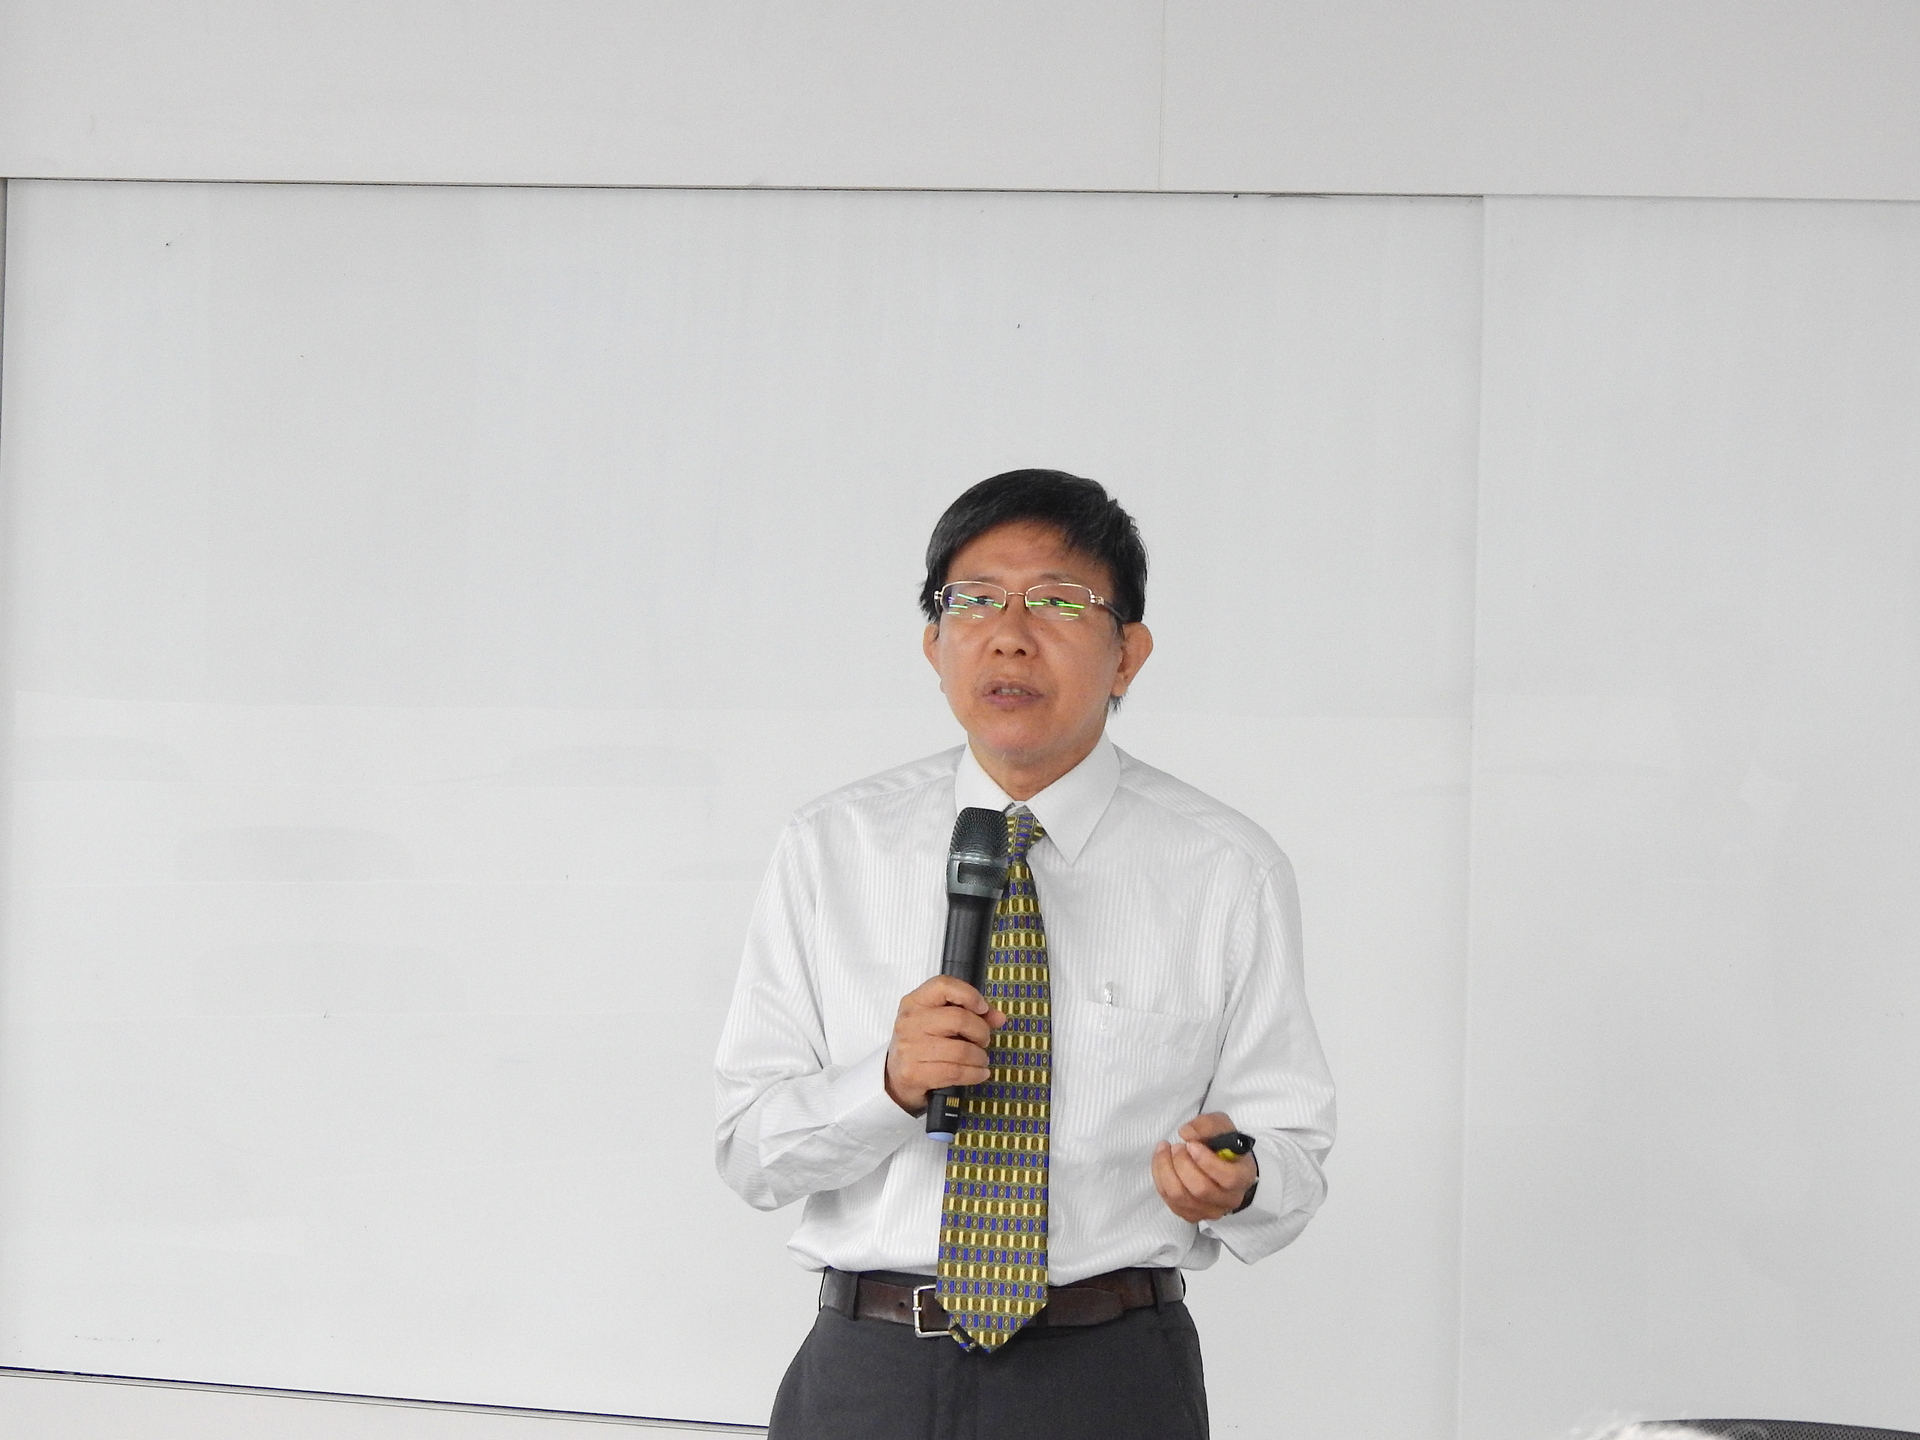 Prof. Anlin Chen, Associate Dean of College of Management, presents